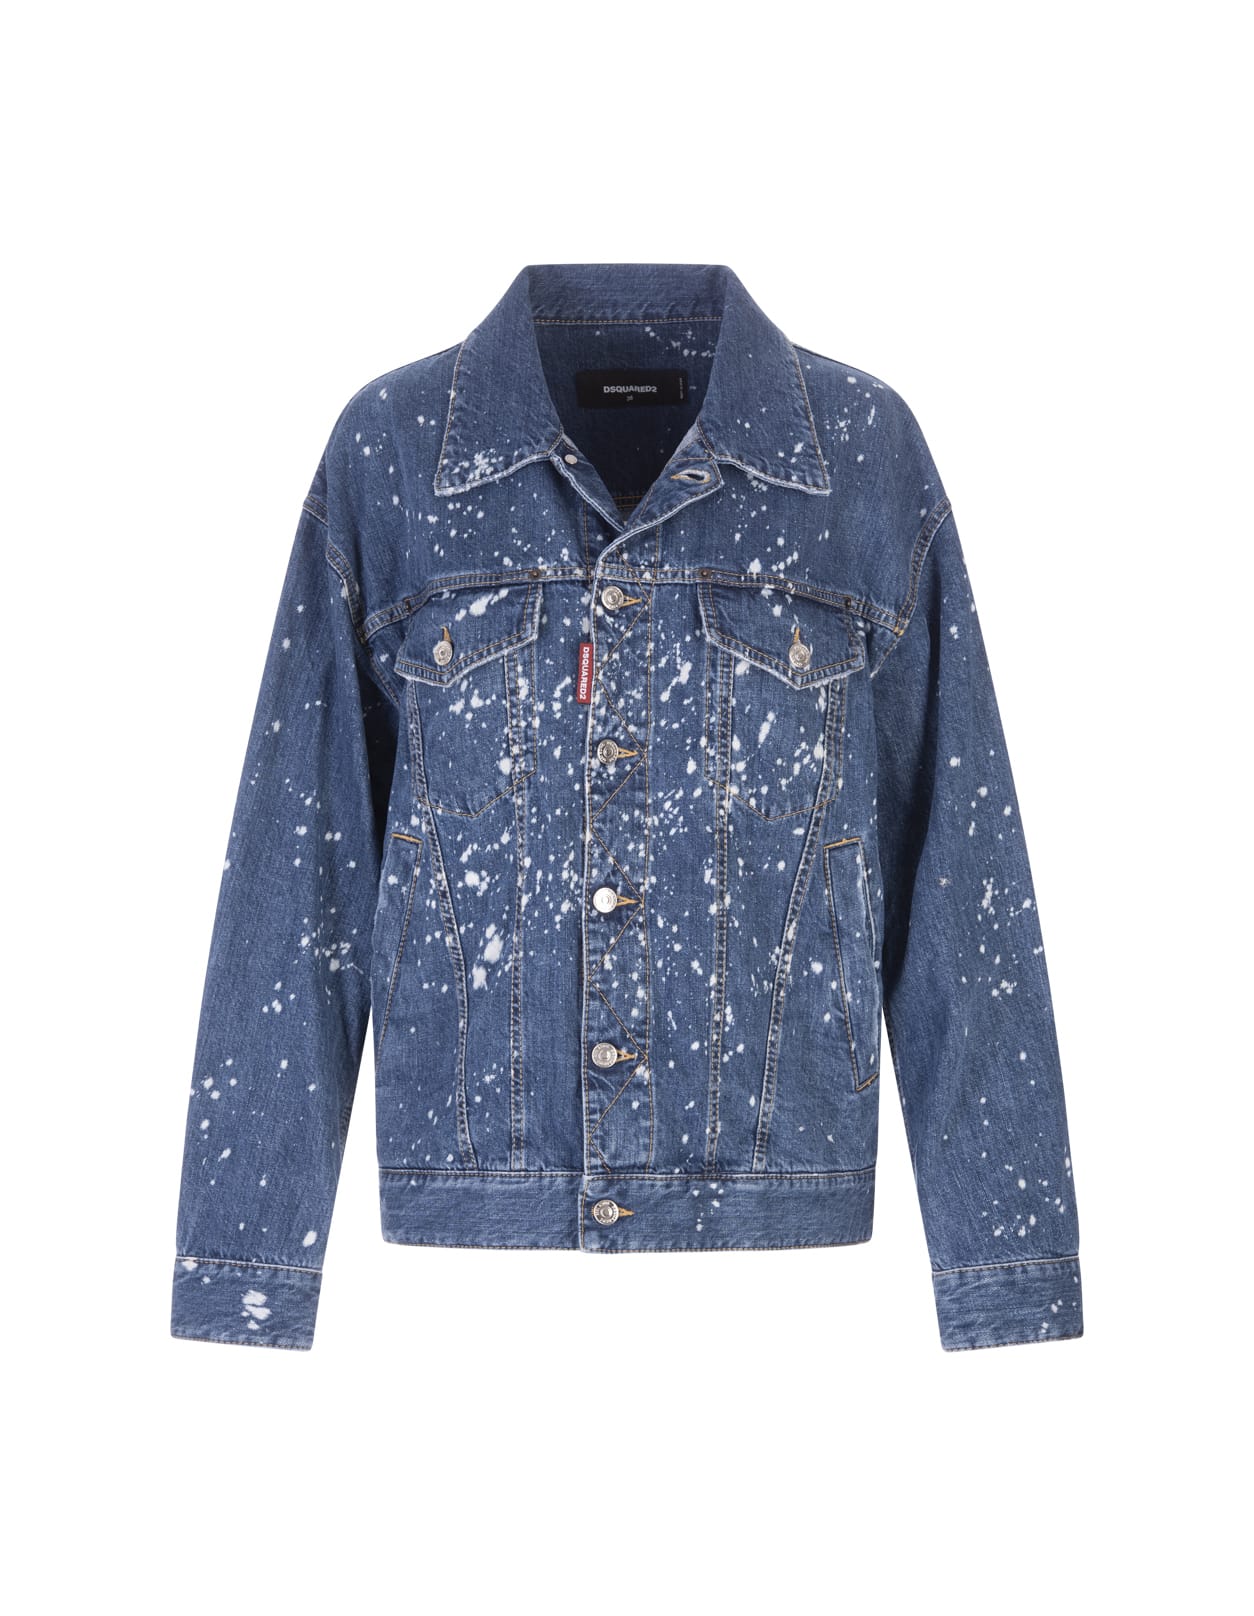 Blue Denim Jacket With Colour Stains